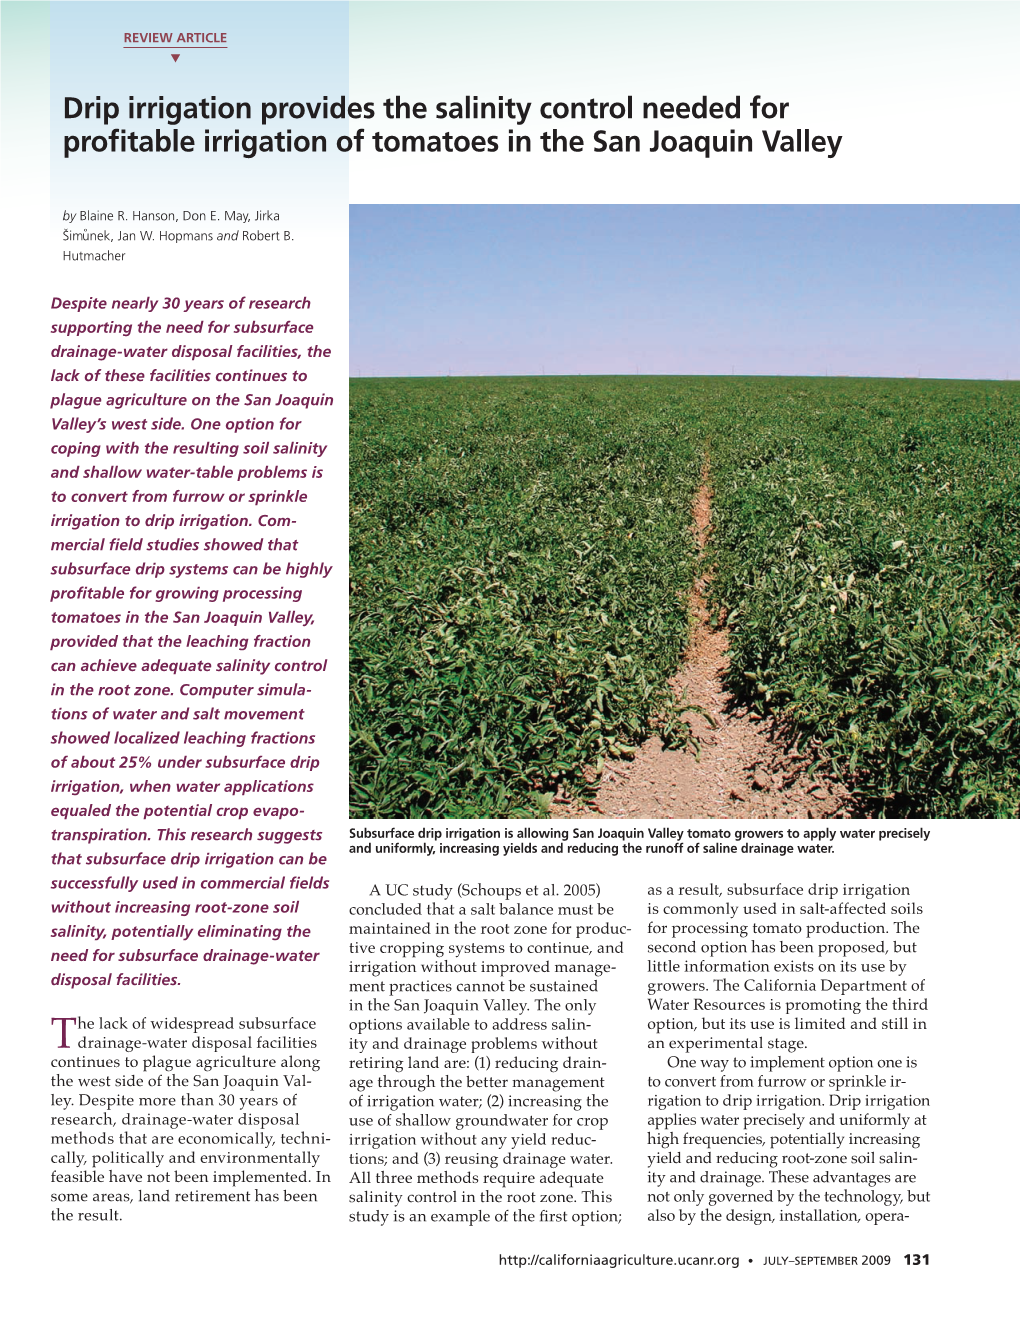 Drip Irrigation Provides the Salinity Control Needed for Profitable Irrigation of Tomatoes in the San Joaquin Valley